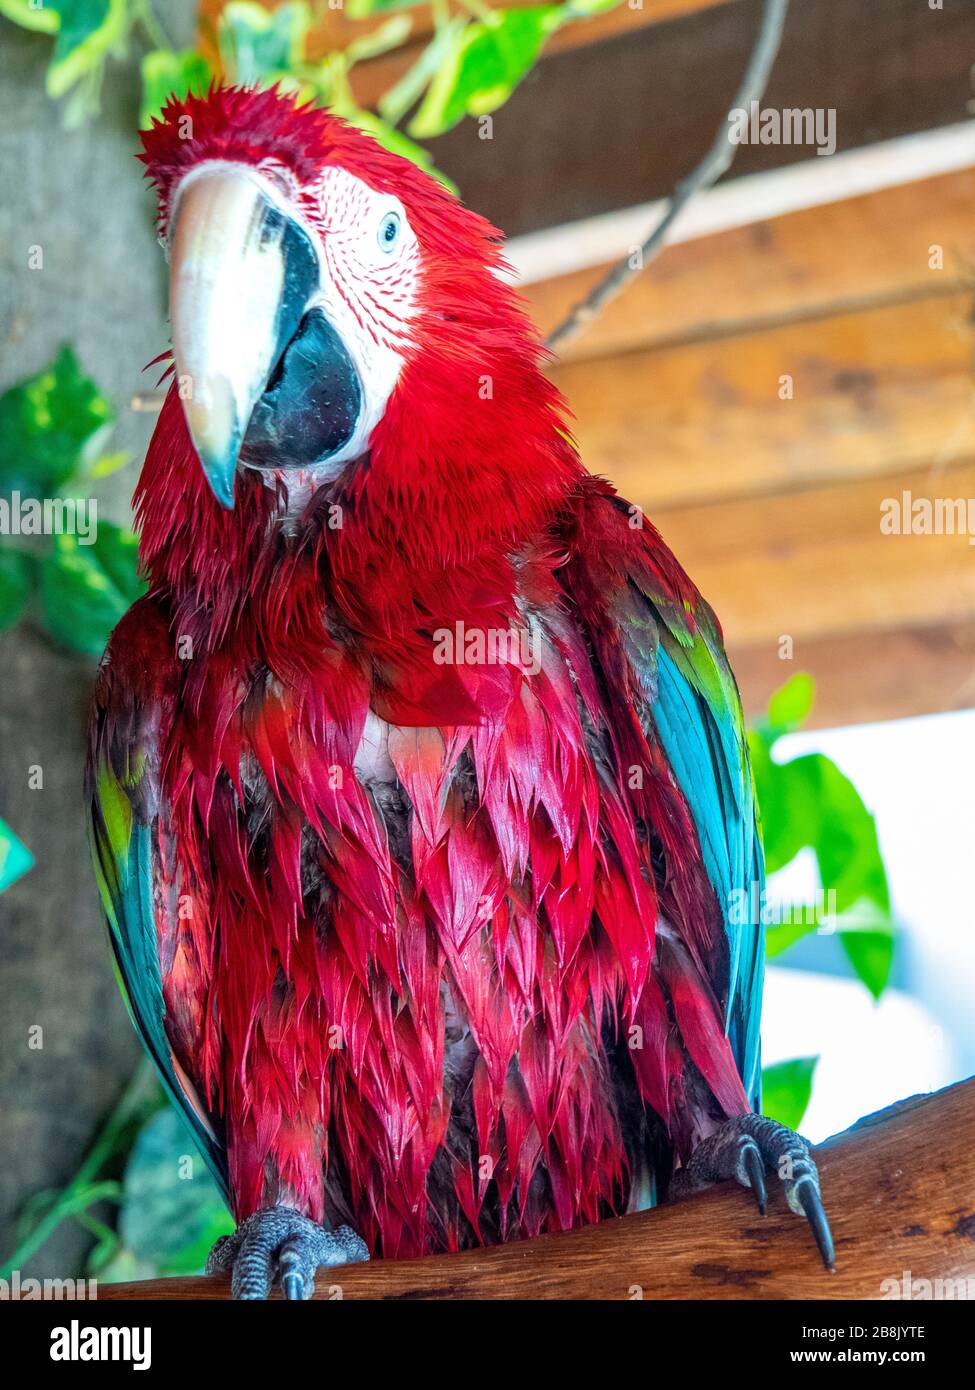 Green-winged macaw or red-and-green macaw (Are chloropterus) in captivity at KL Tower Mini Zoo, Kuala Lumpur Malaysia. Stock Photo